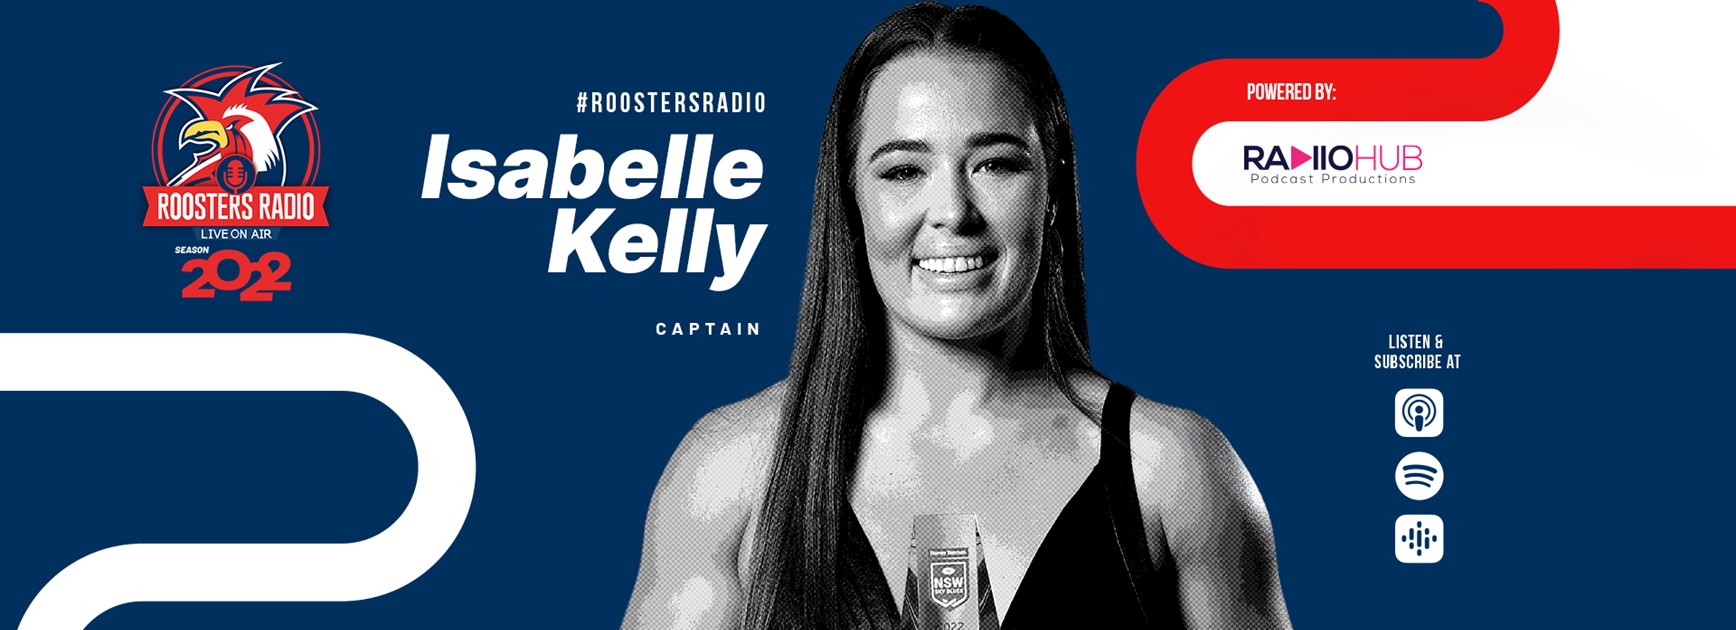 Roosters Radio Ep 144: Isabelle Kelly